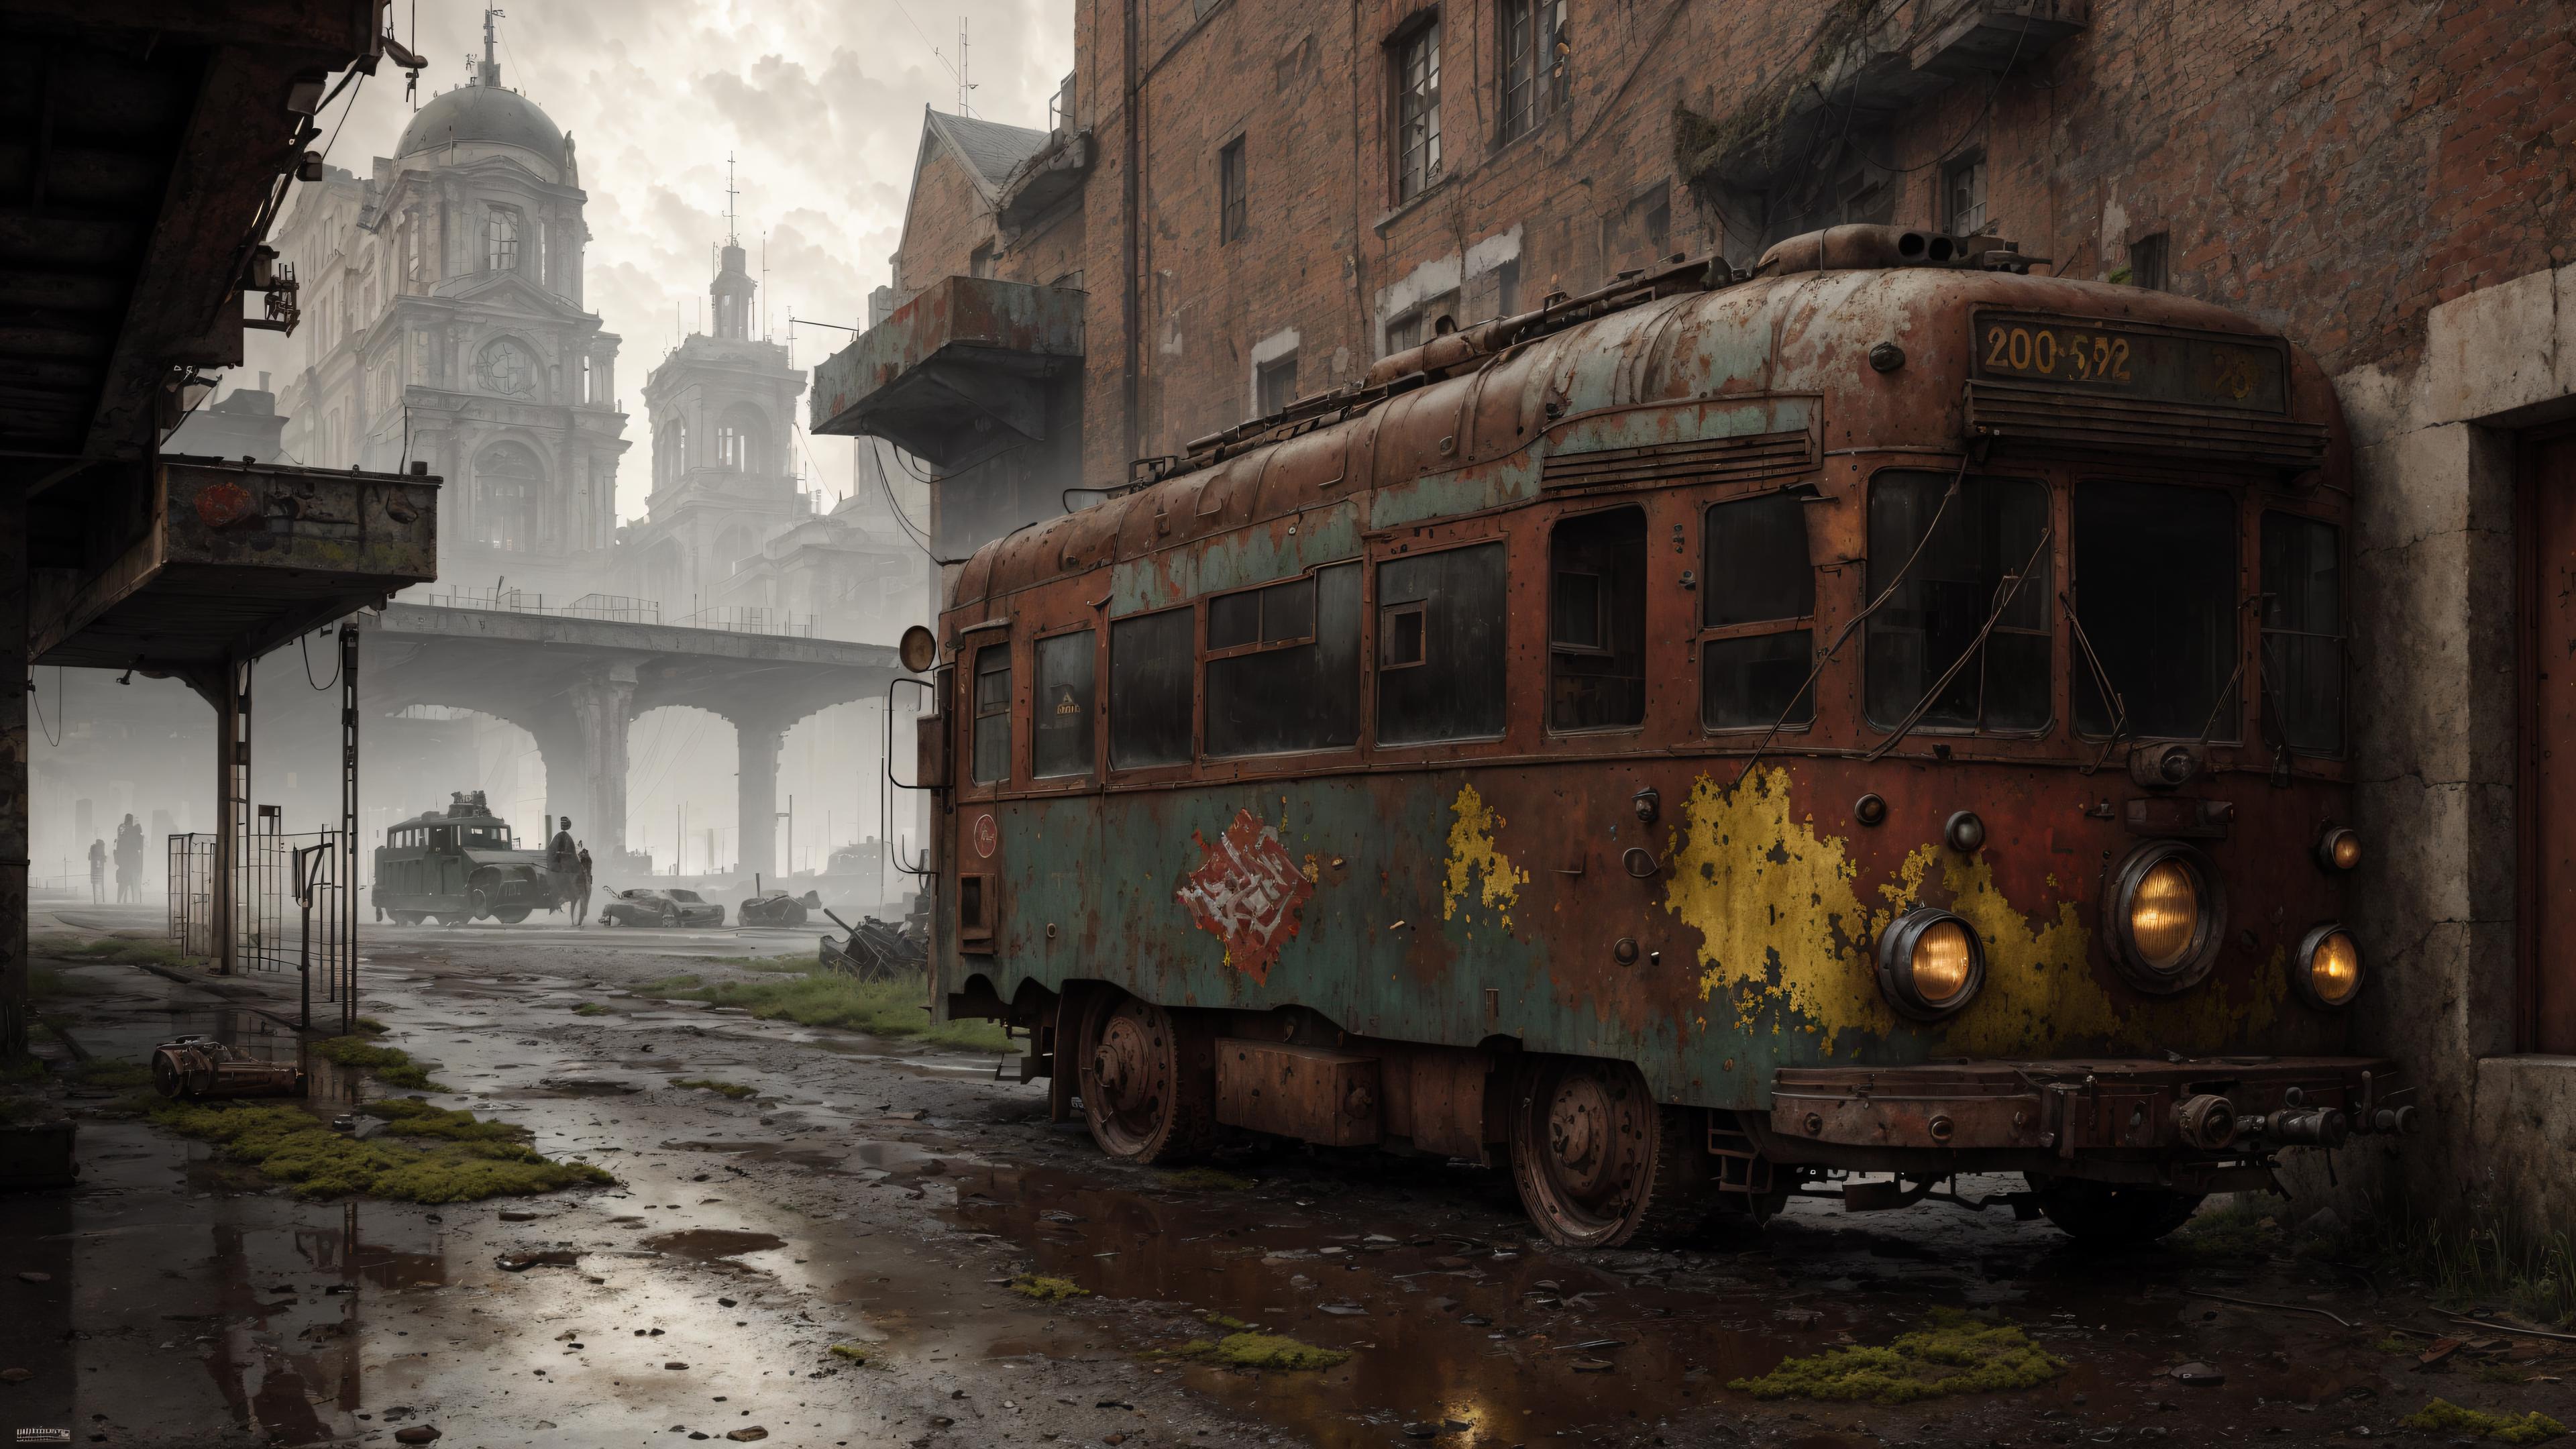 A rusty, old bus with graffiti on it is parked in a city street.